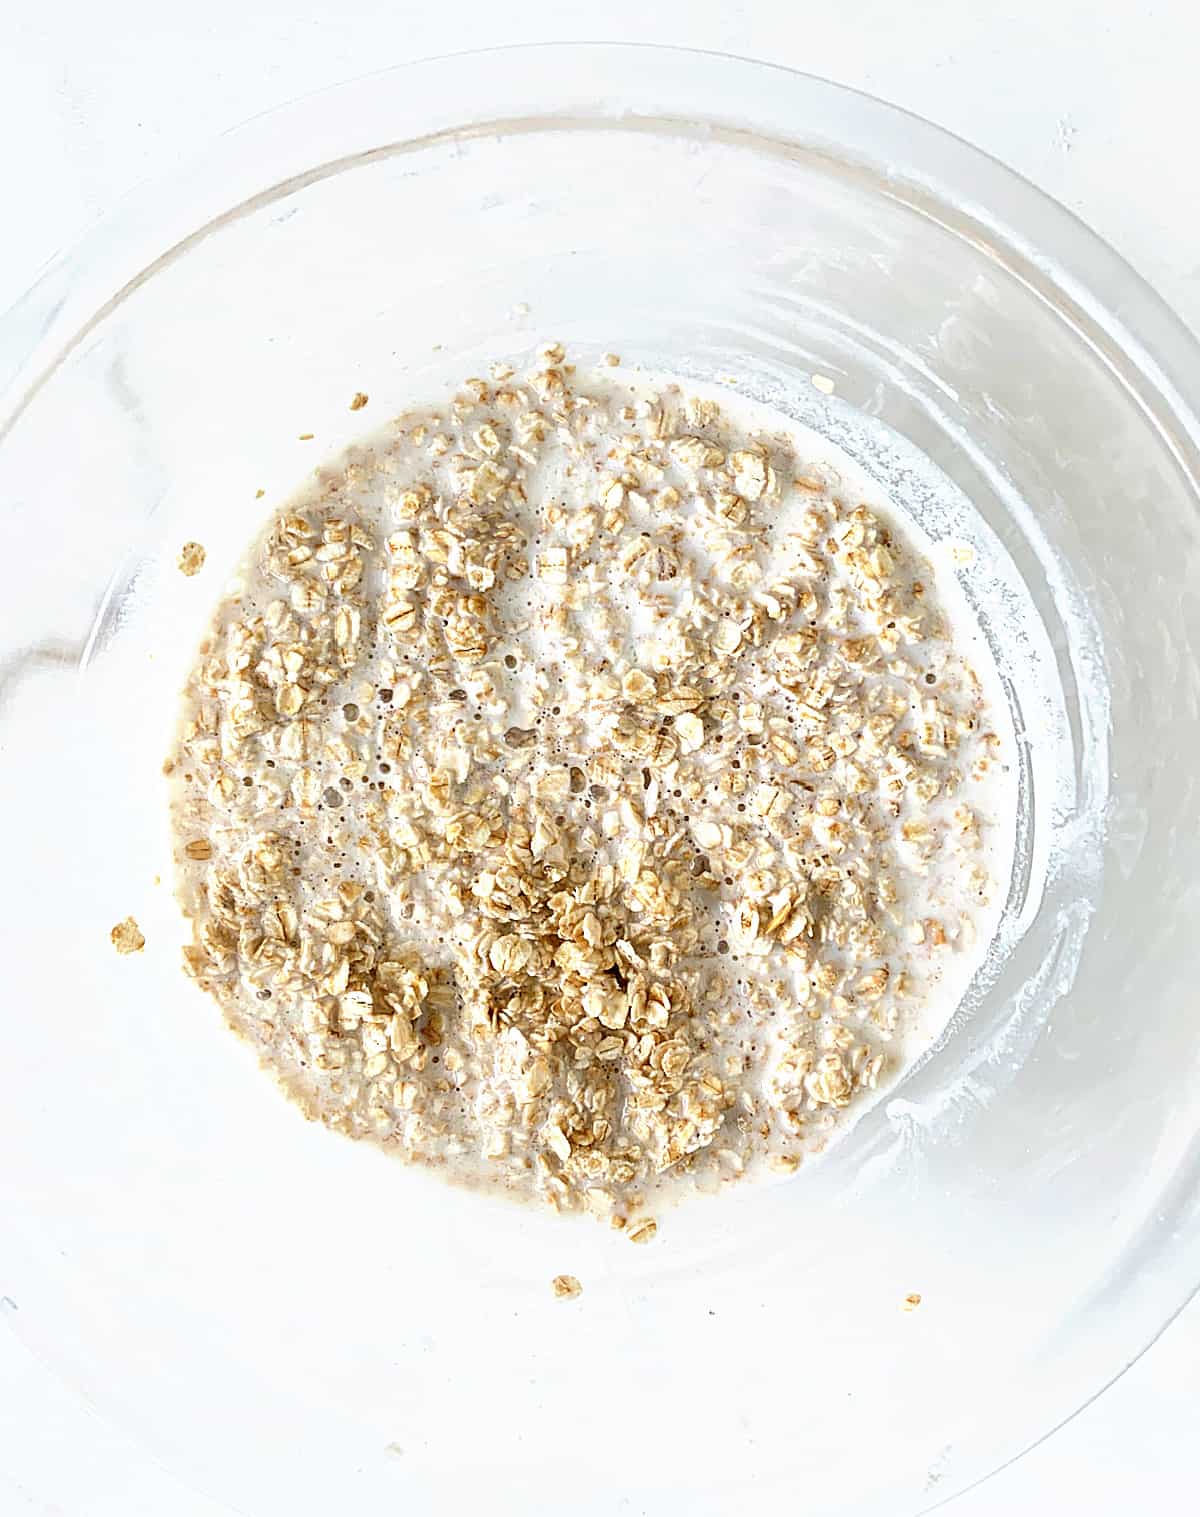 Oats and milk in a glass bowl on a white surface